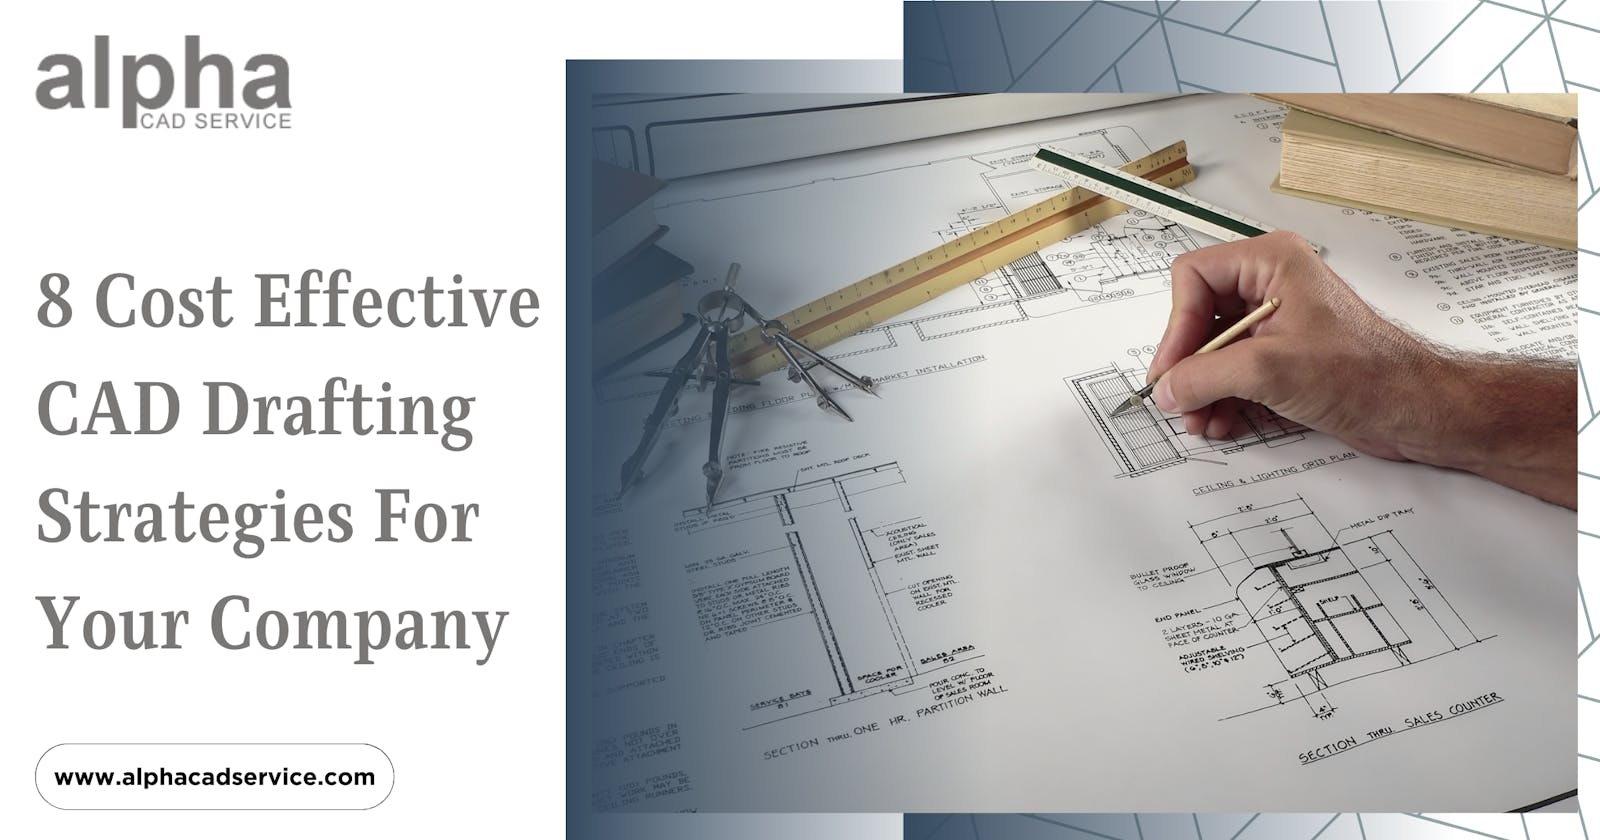 8 Cost Effective CAD Drafting Strategies For Your Company